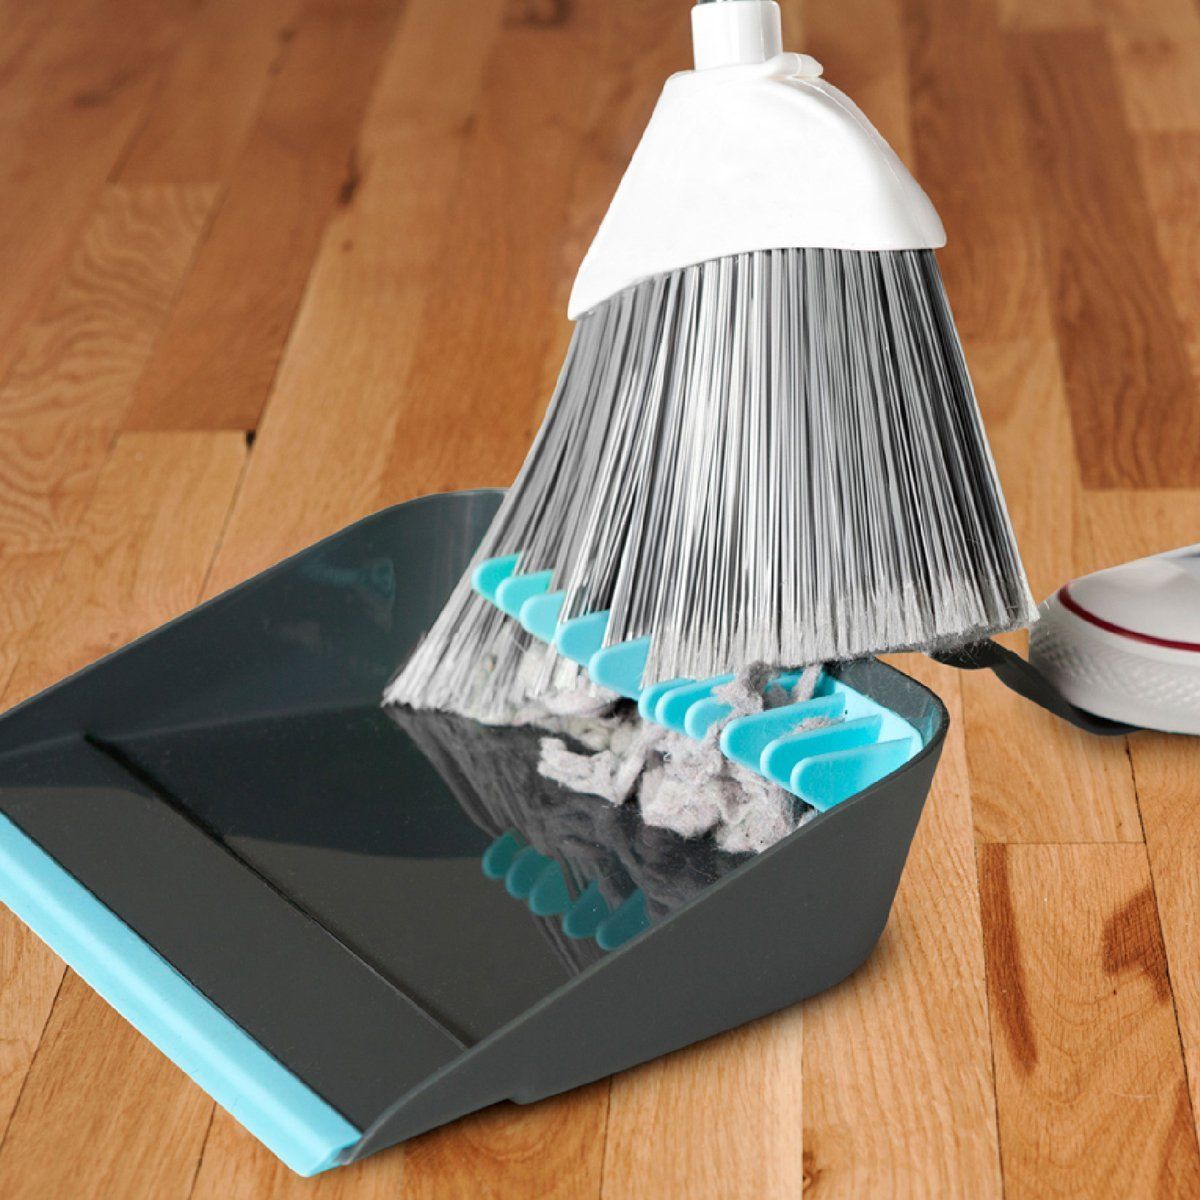 28 Cleaning Products for Lazy People Who Want a Neat Home No Effort